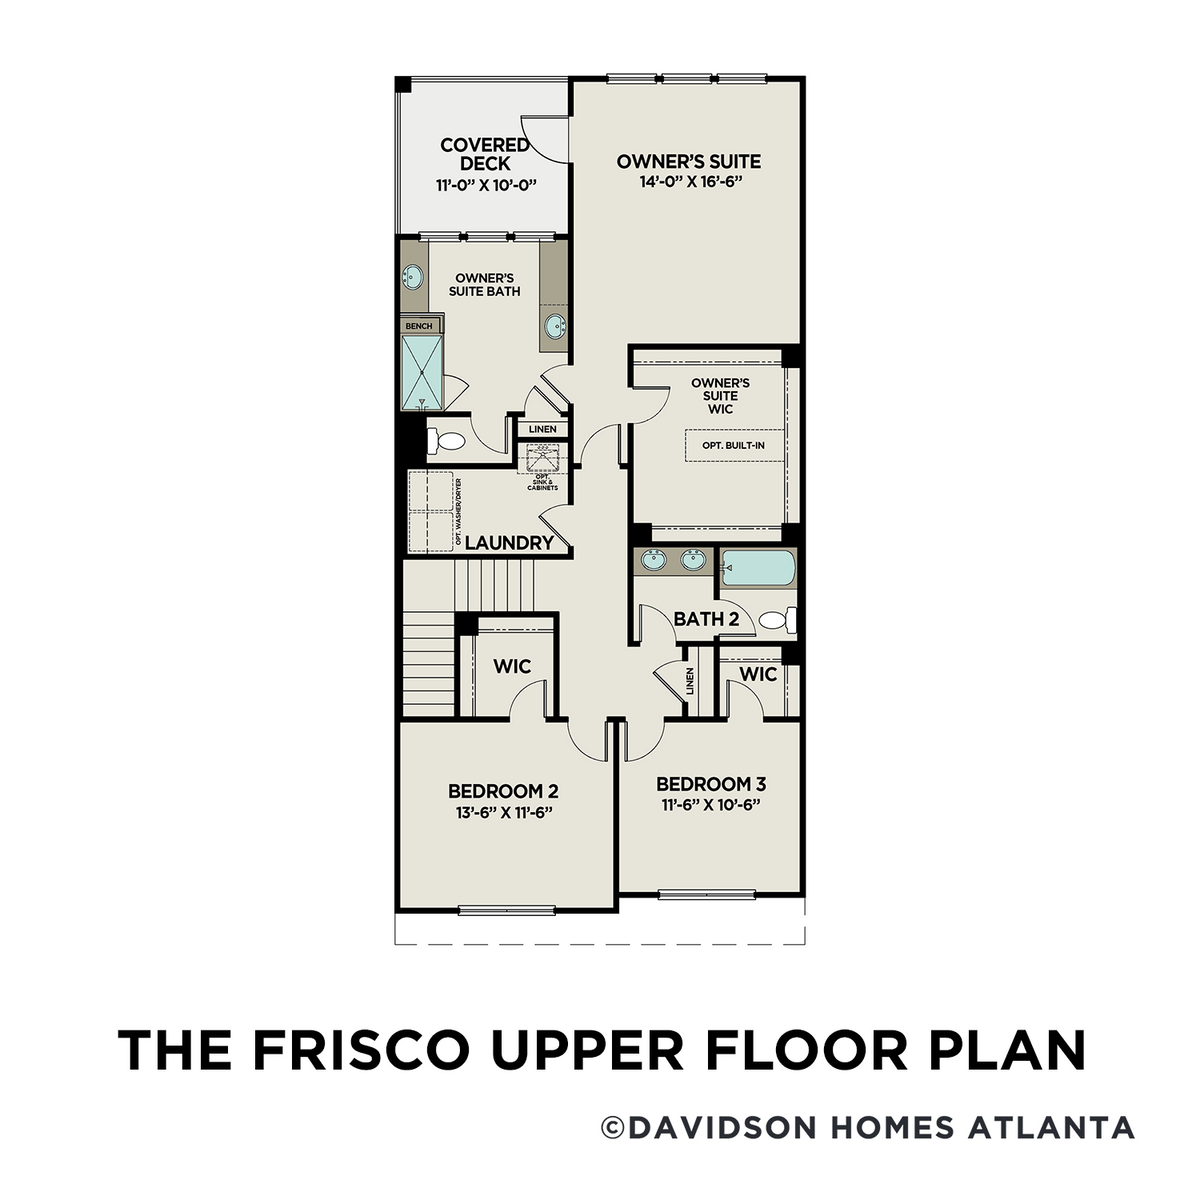 2 - The Frisco A floor plan layout for 120 Batten Board Way in Davidson Homes' The Village at Towne Lake community.